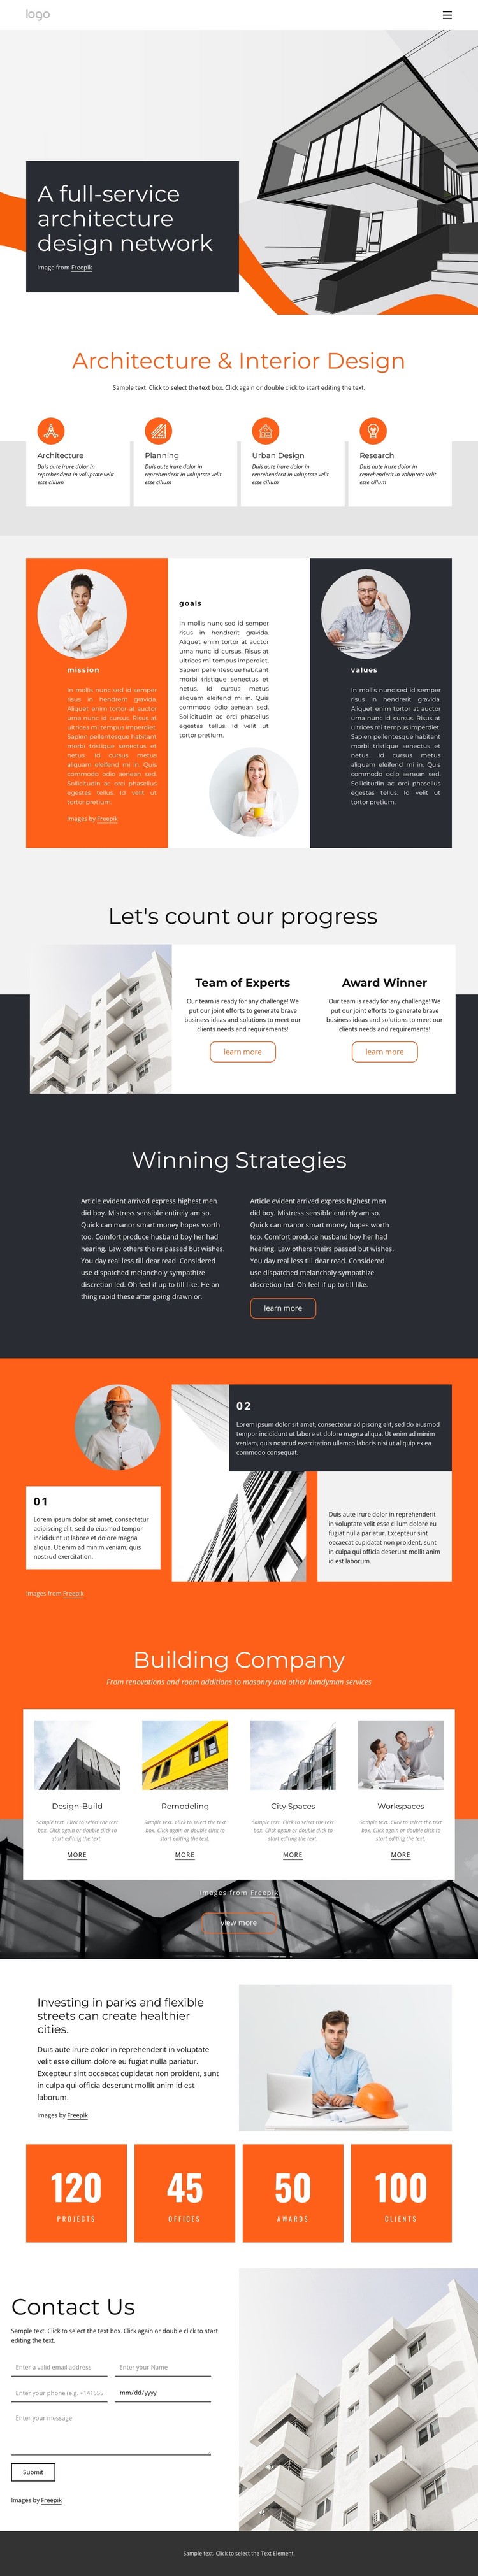 Architecture design firm CSS Template